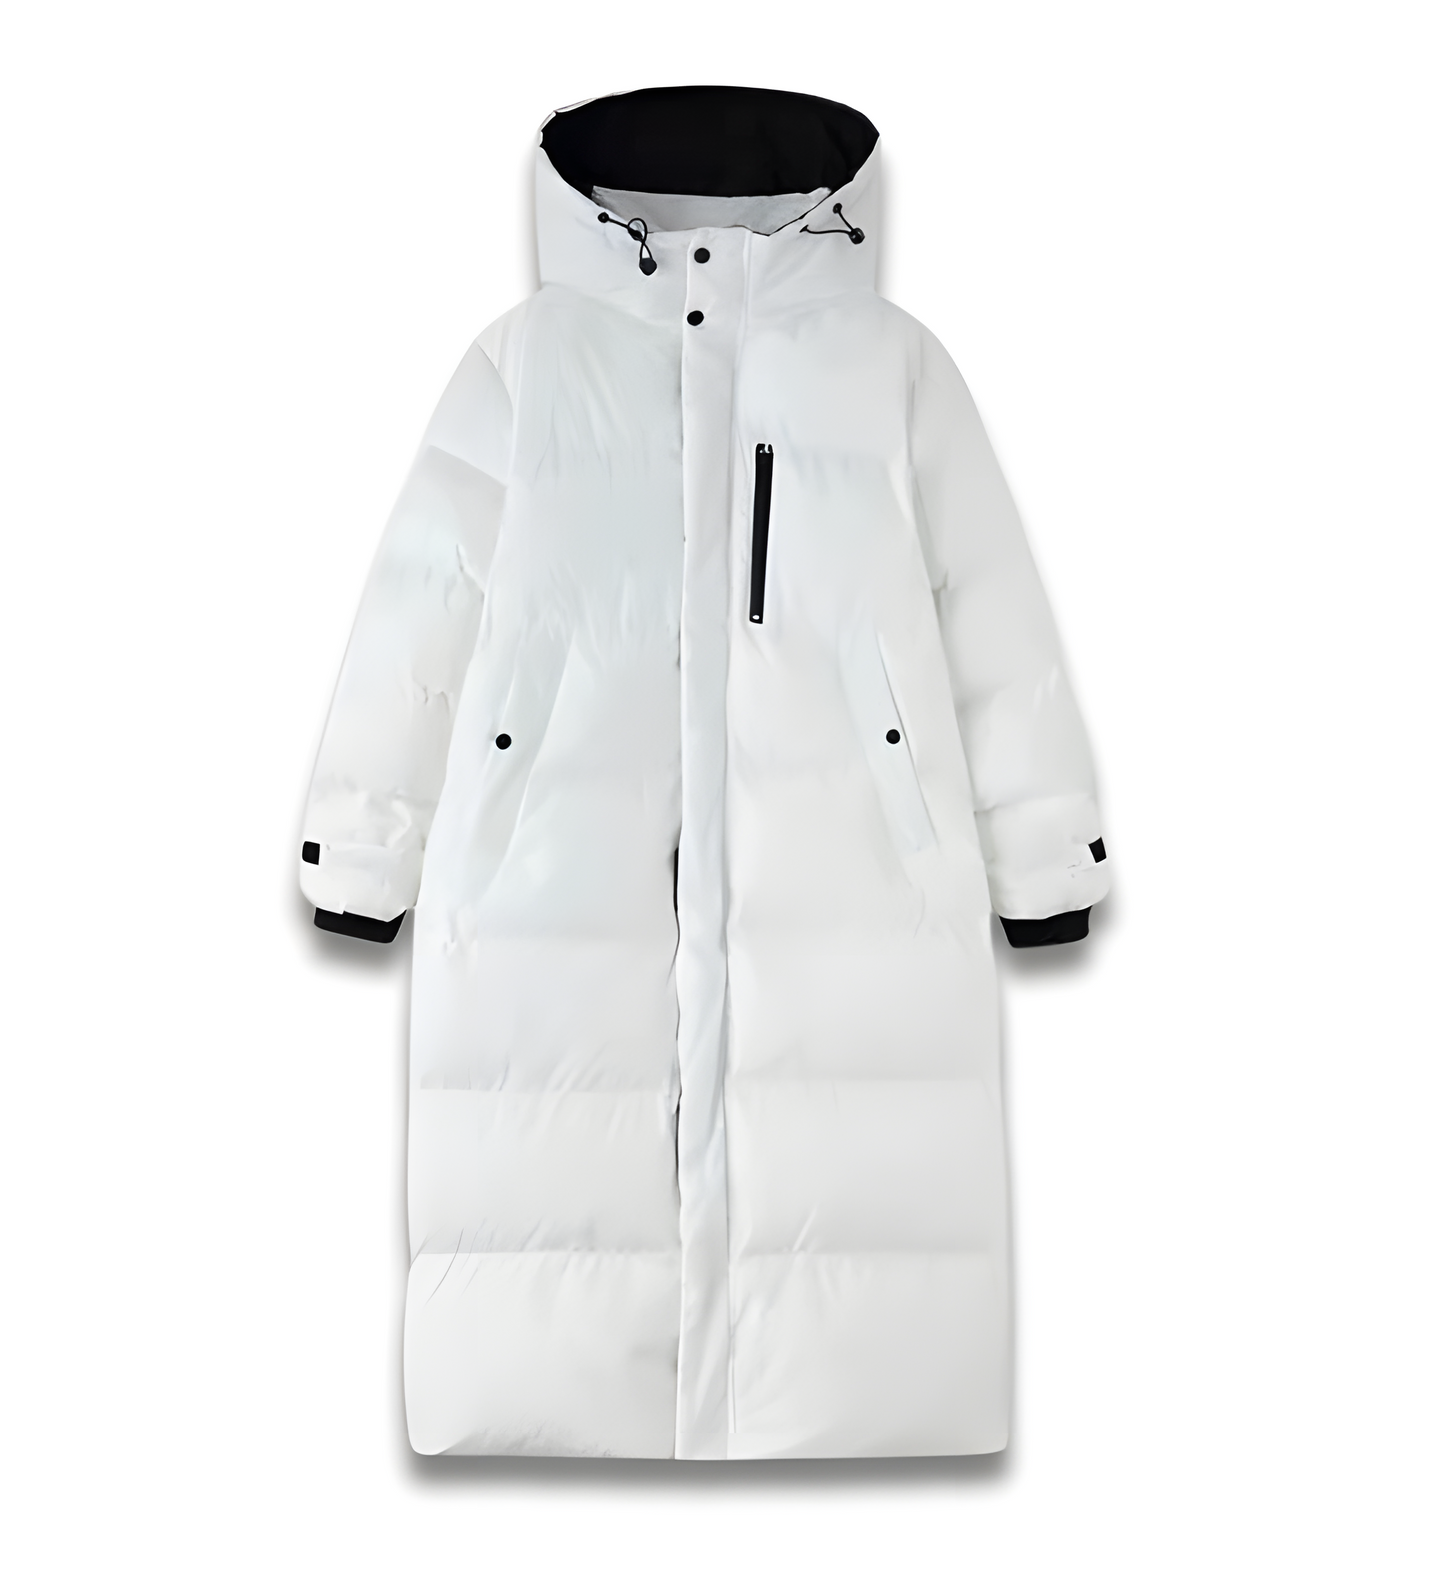 Windproof long jacket with hood for winter